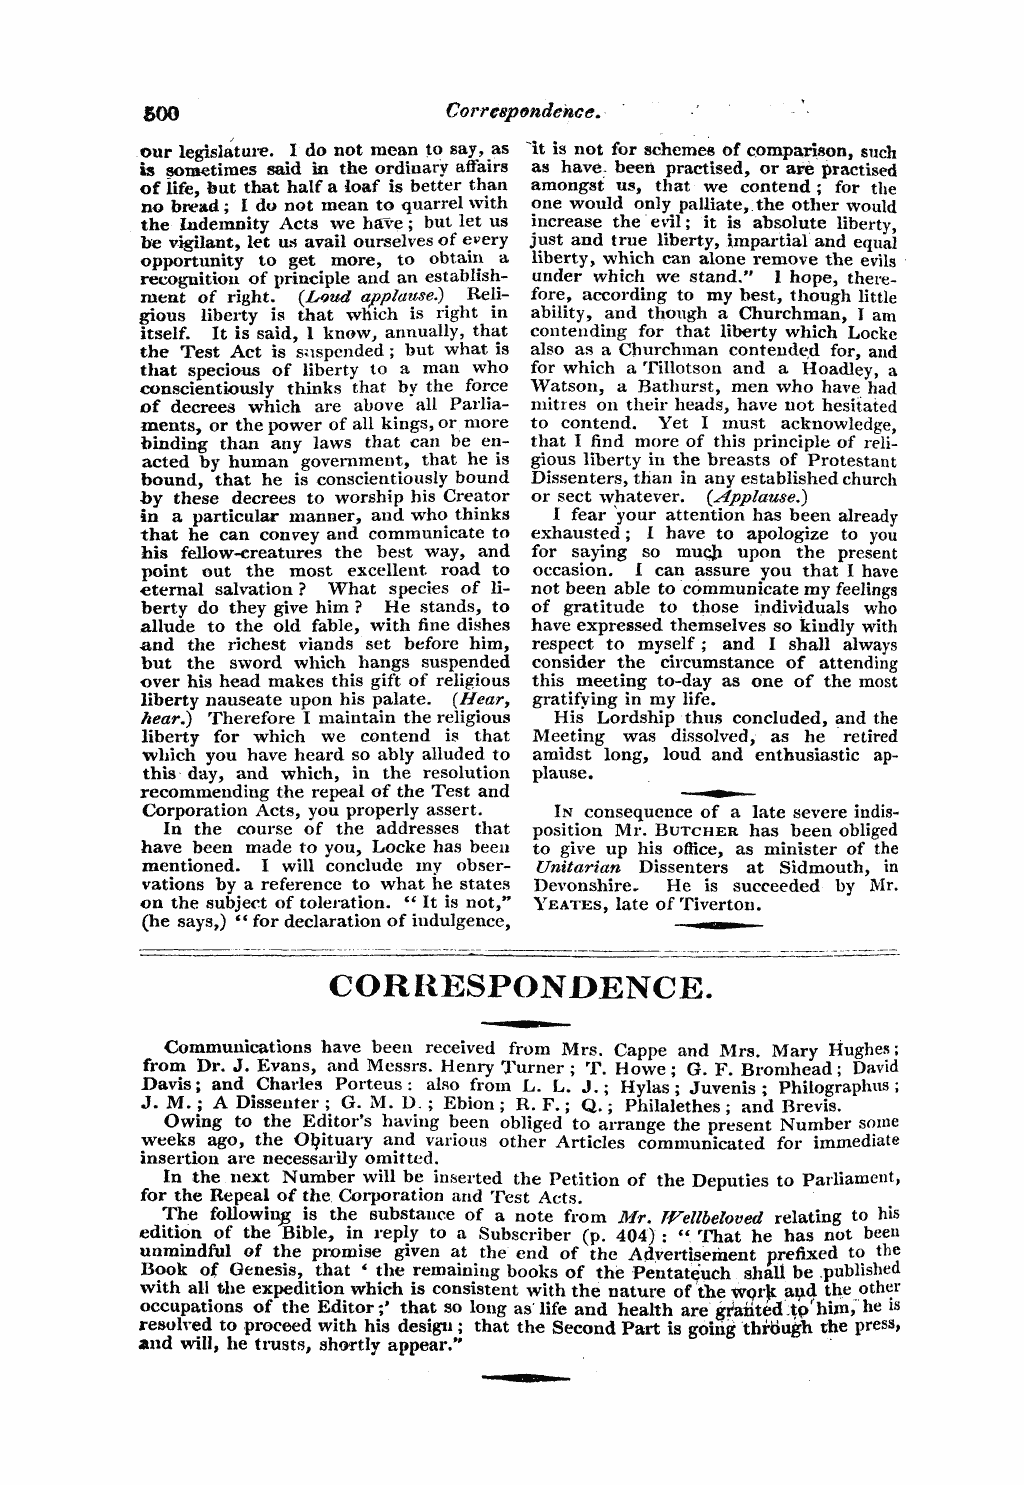 Monthly Repository (1806-1838) and Unitarian Chronicle (1832-1833): F Y, 1st edition - Correspondence.